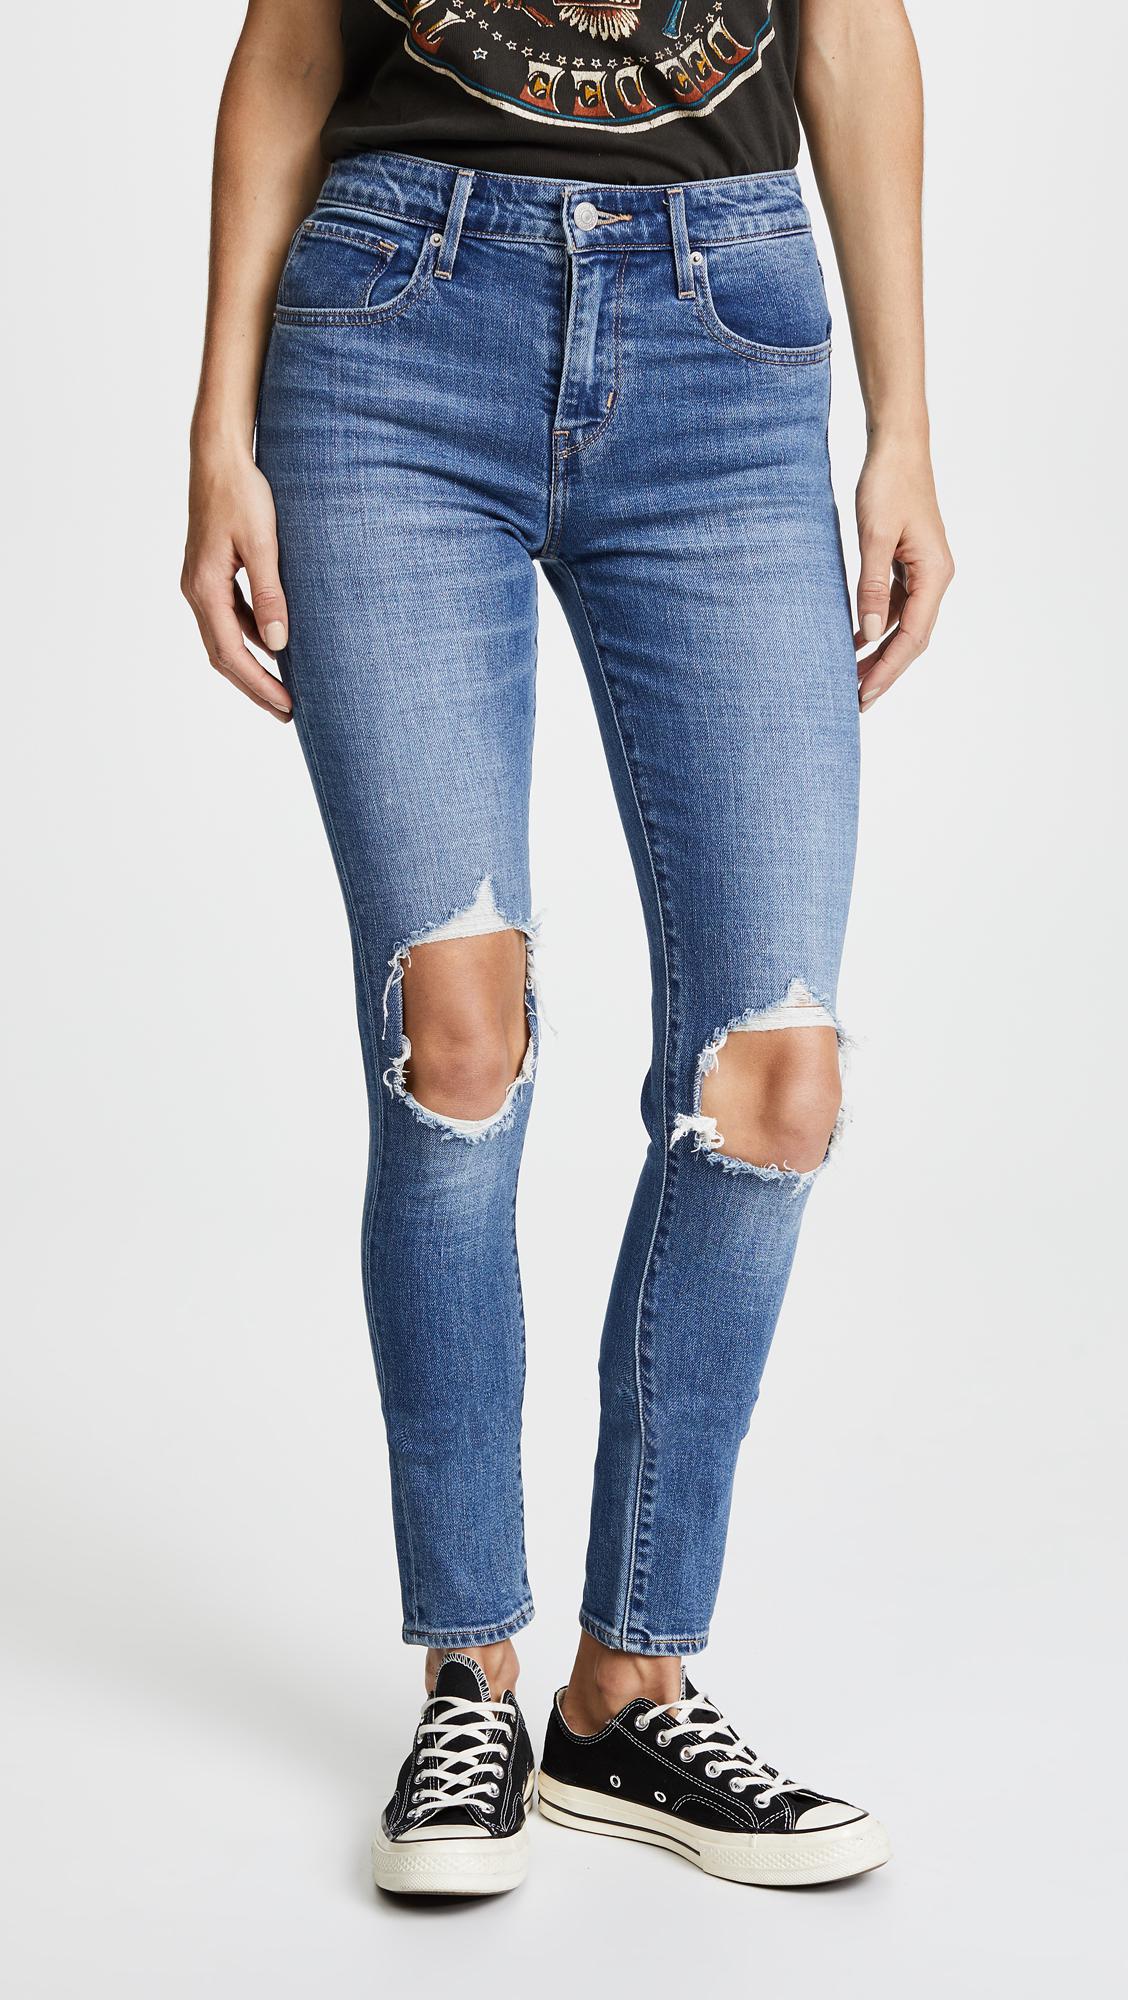 Lyst - Levi'S 721 High Rise Distressed Skinny Jeans in Blue